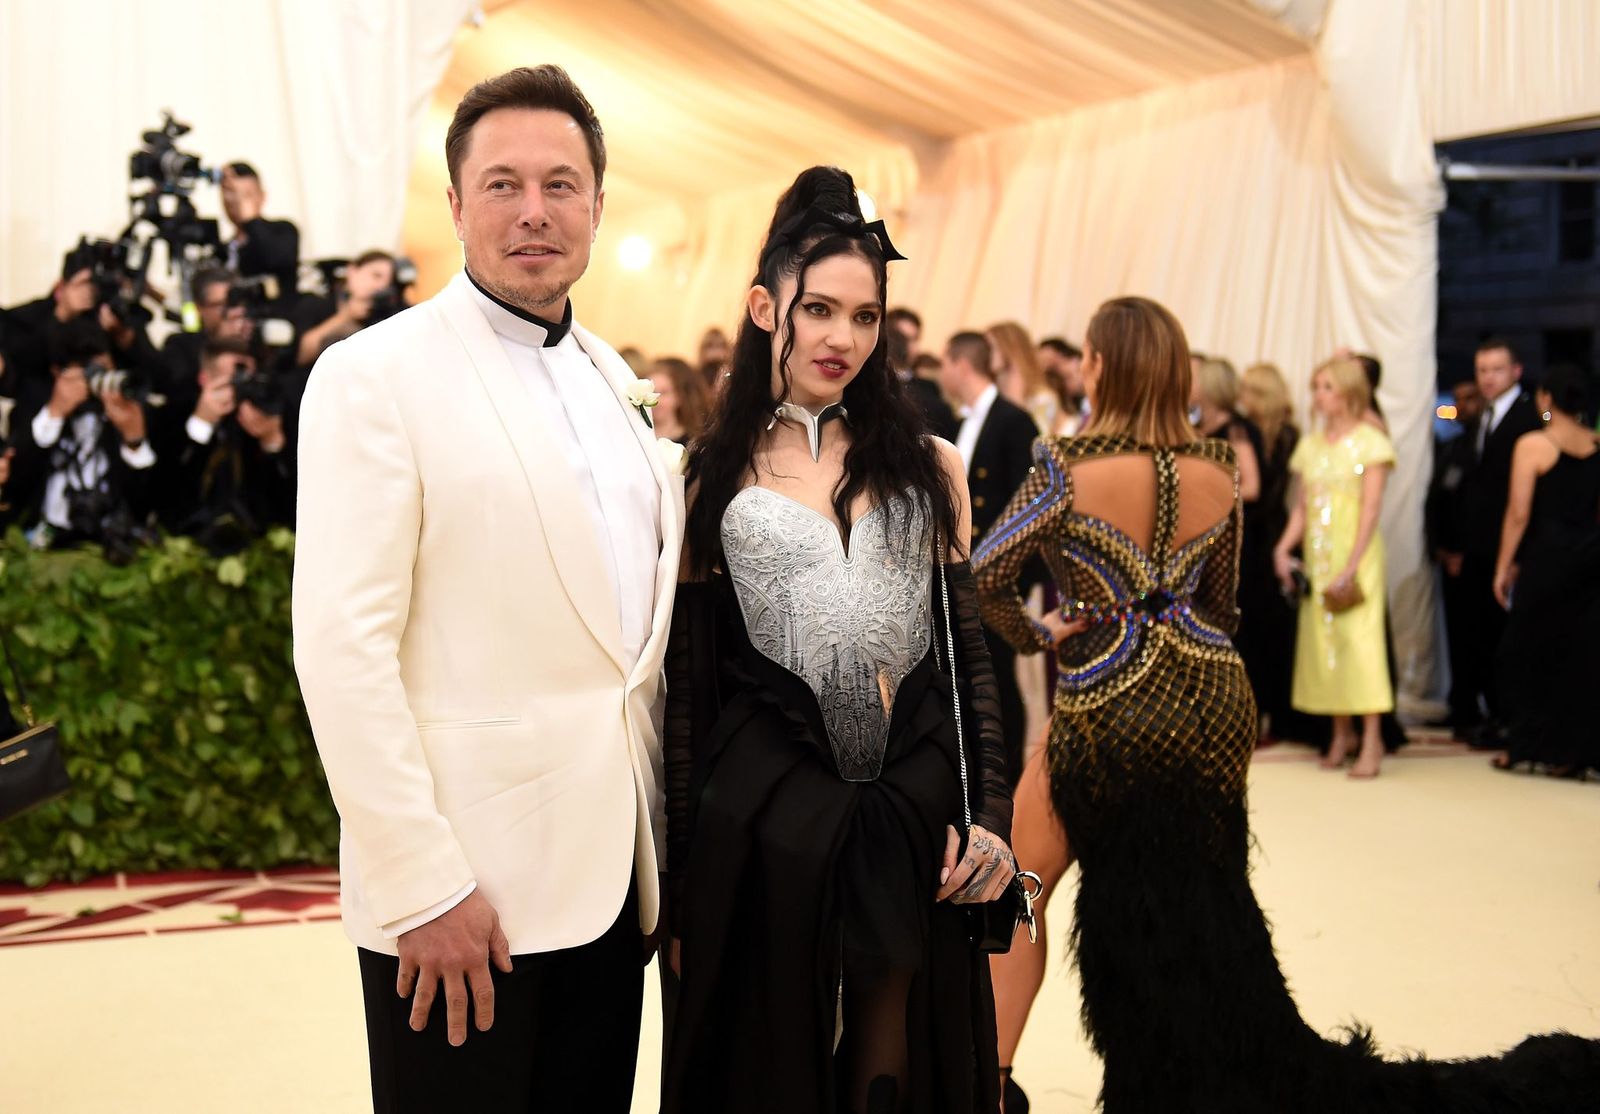 Elon Musk and Claire Boucher aka Grimes attending the Met Gala in 2018 Source | Photo: Getty Images